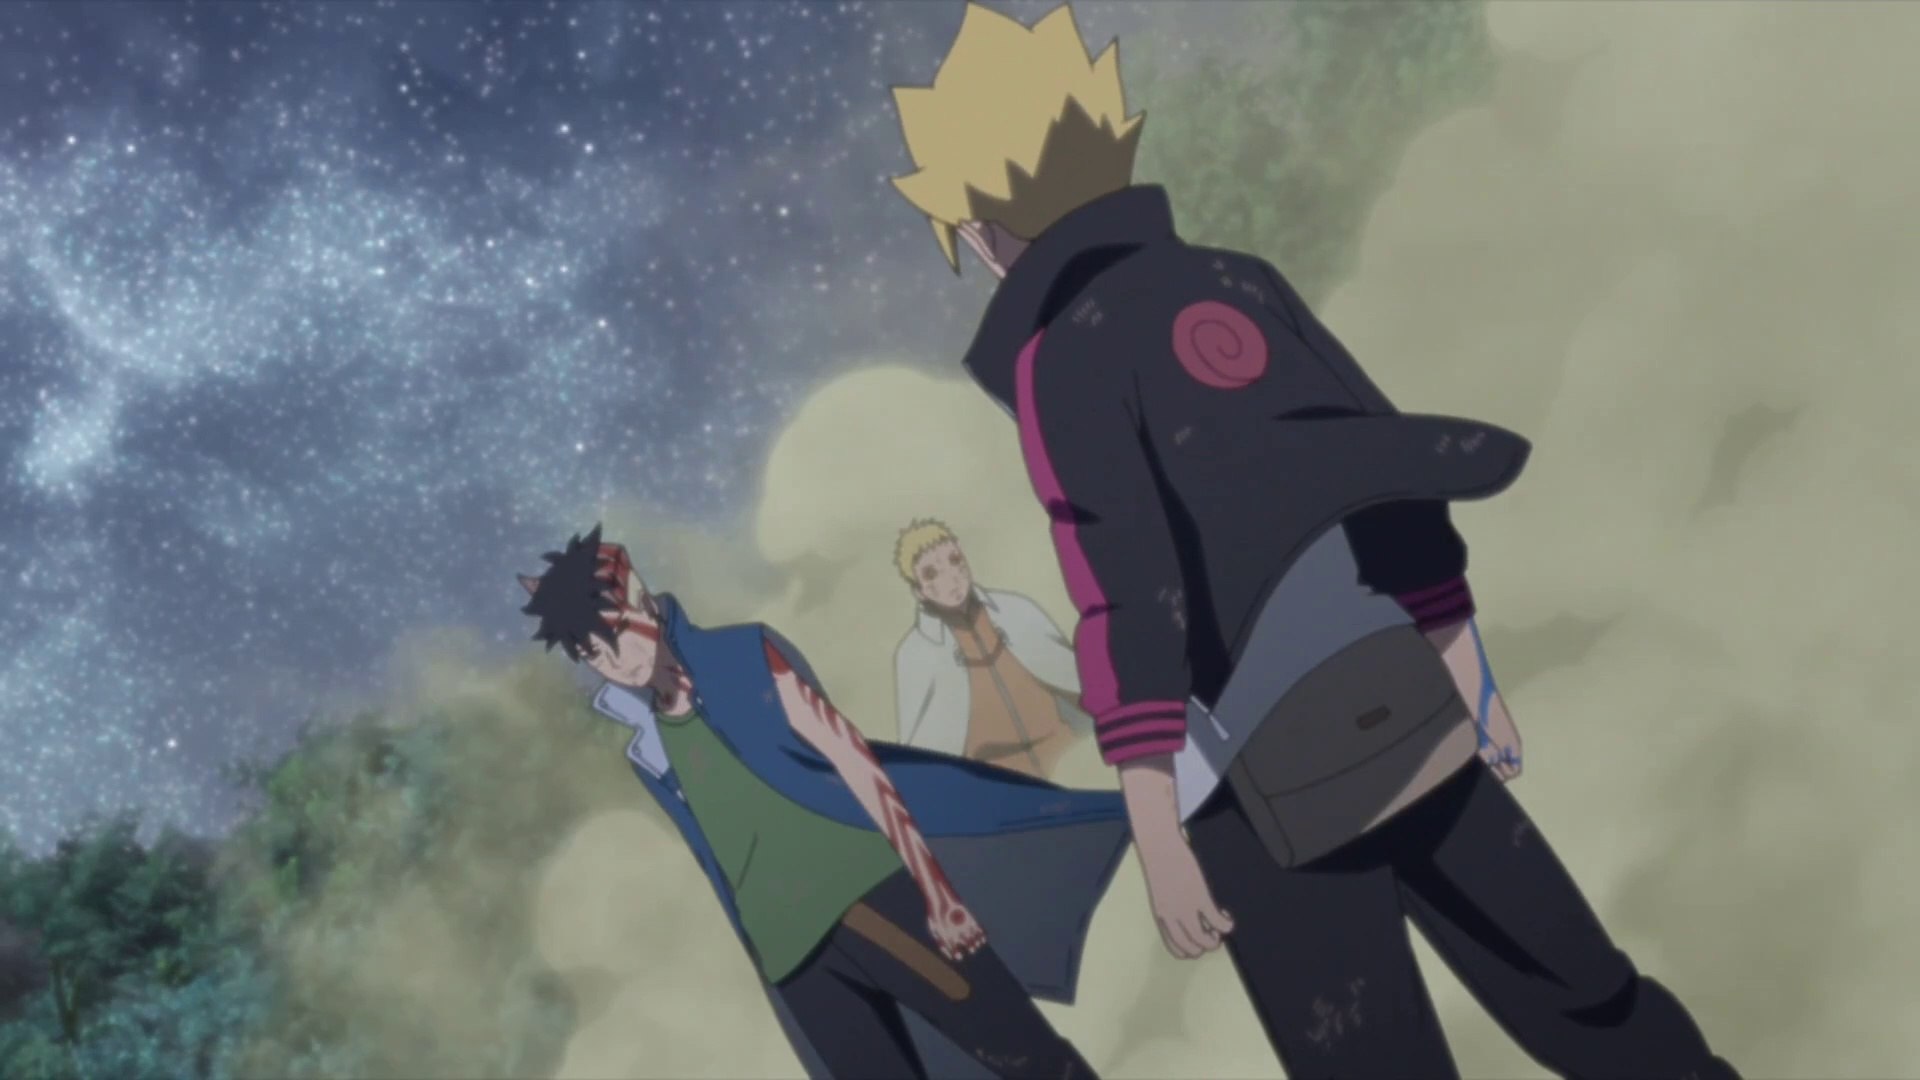 Boruto episode 292: Release date, countdown, where to watch, and